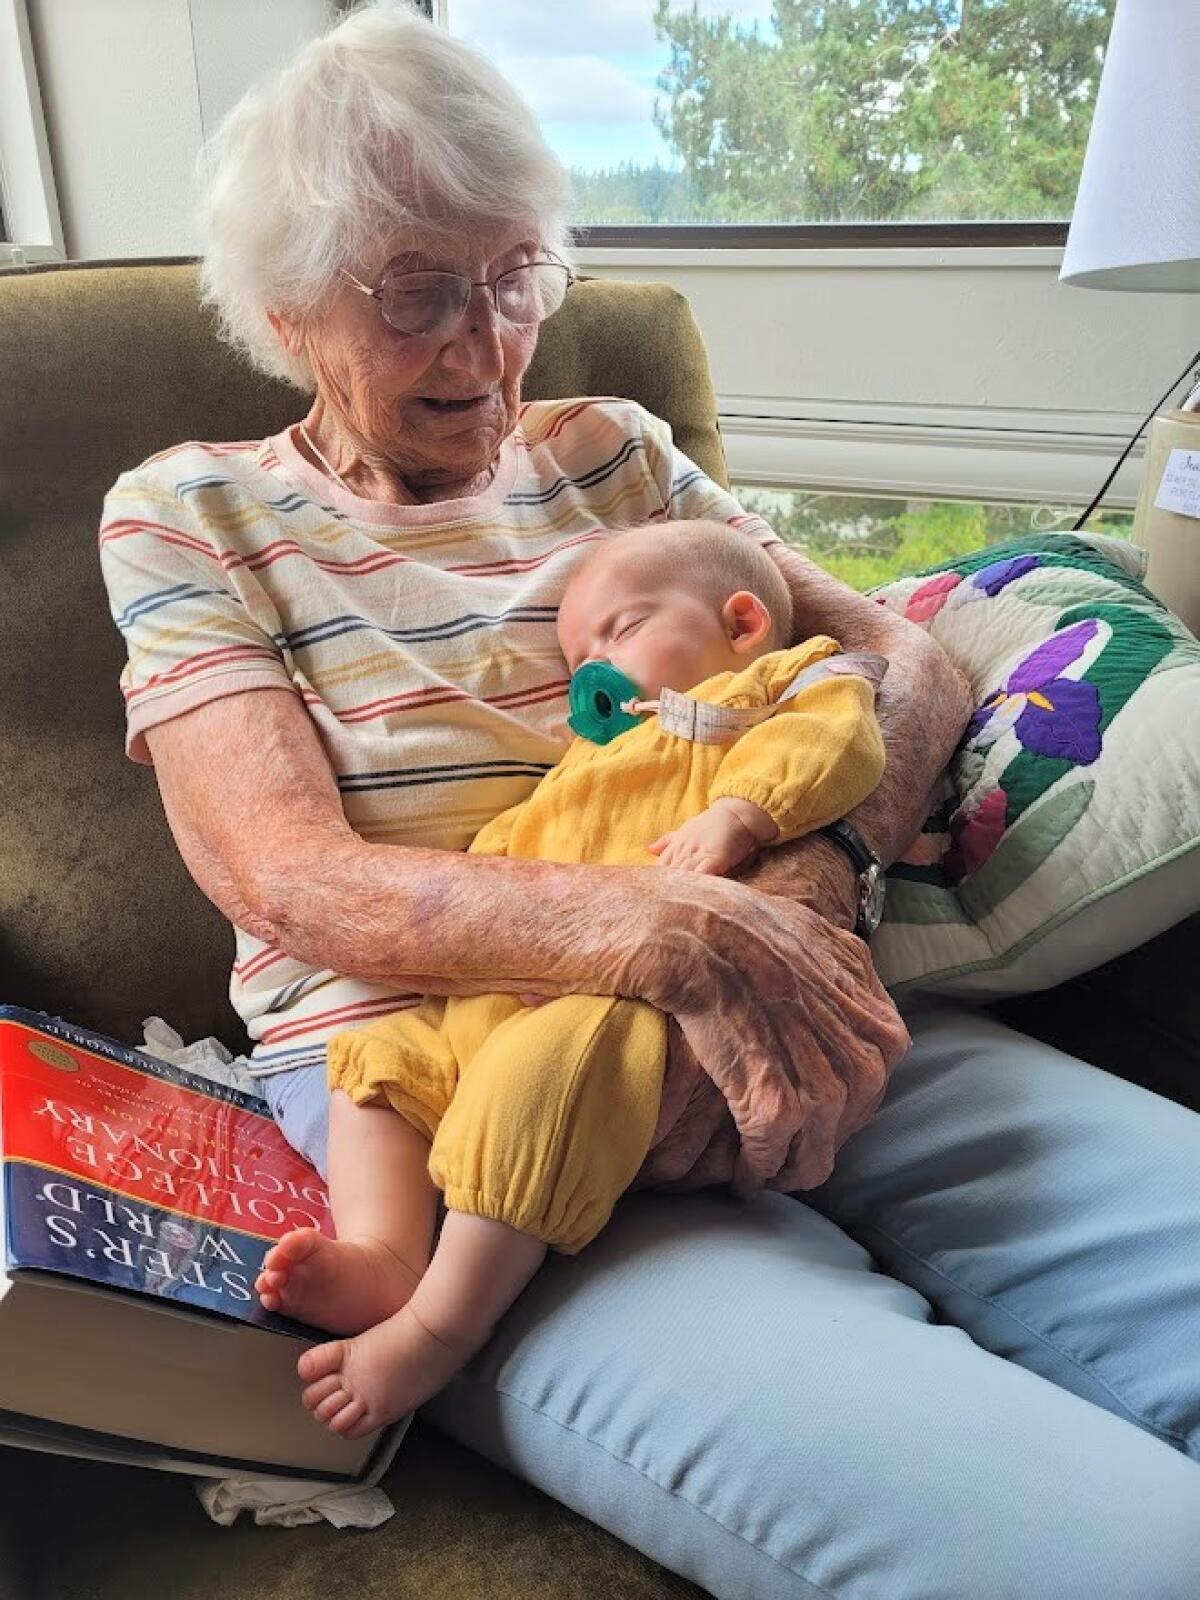 Jeanne Keevil, in 2022, with great-granddaughter Mara and a Webster's New World Dictionary.